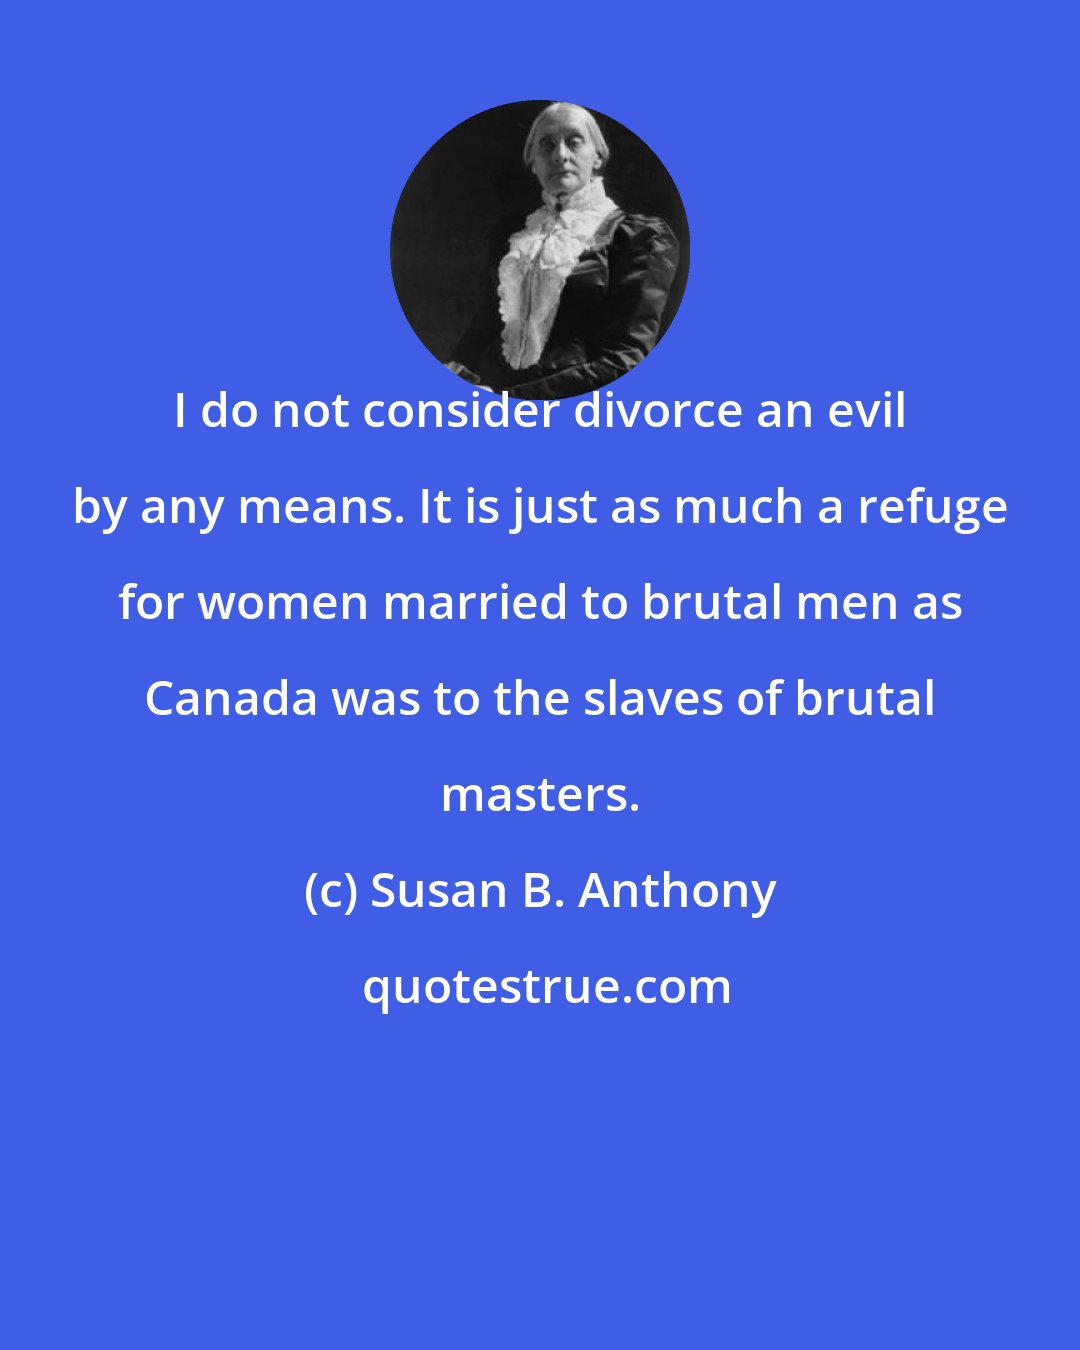 Susan B. Anthony: I do not consider divorce an evil by any means. It is just as much a refuge for women married to brutal men as Canada was to the slaves of brutal masters.